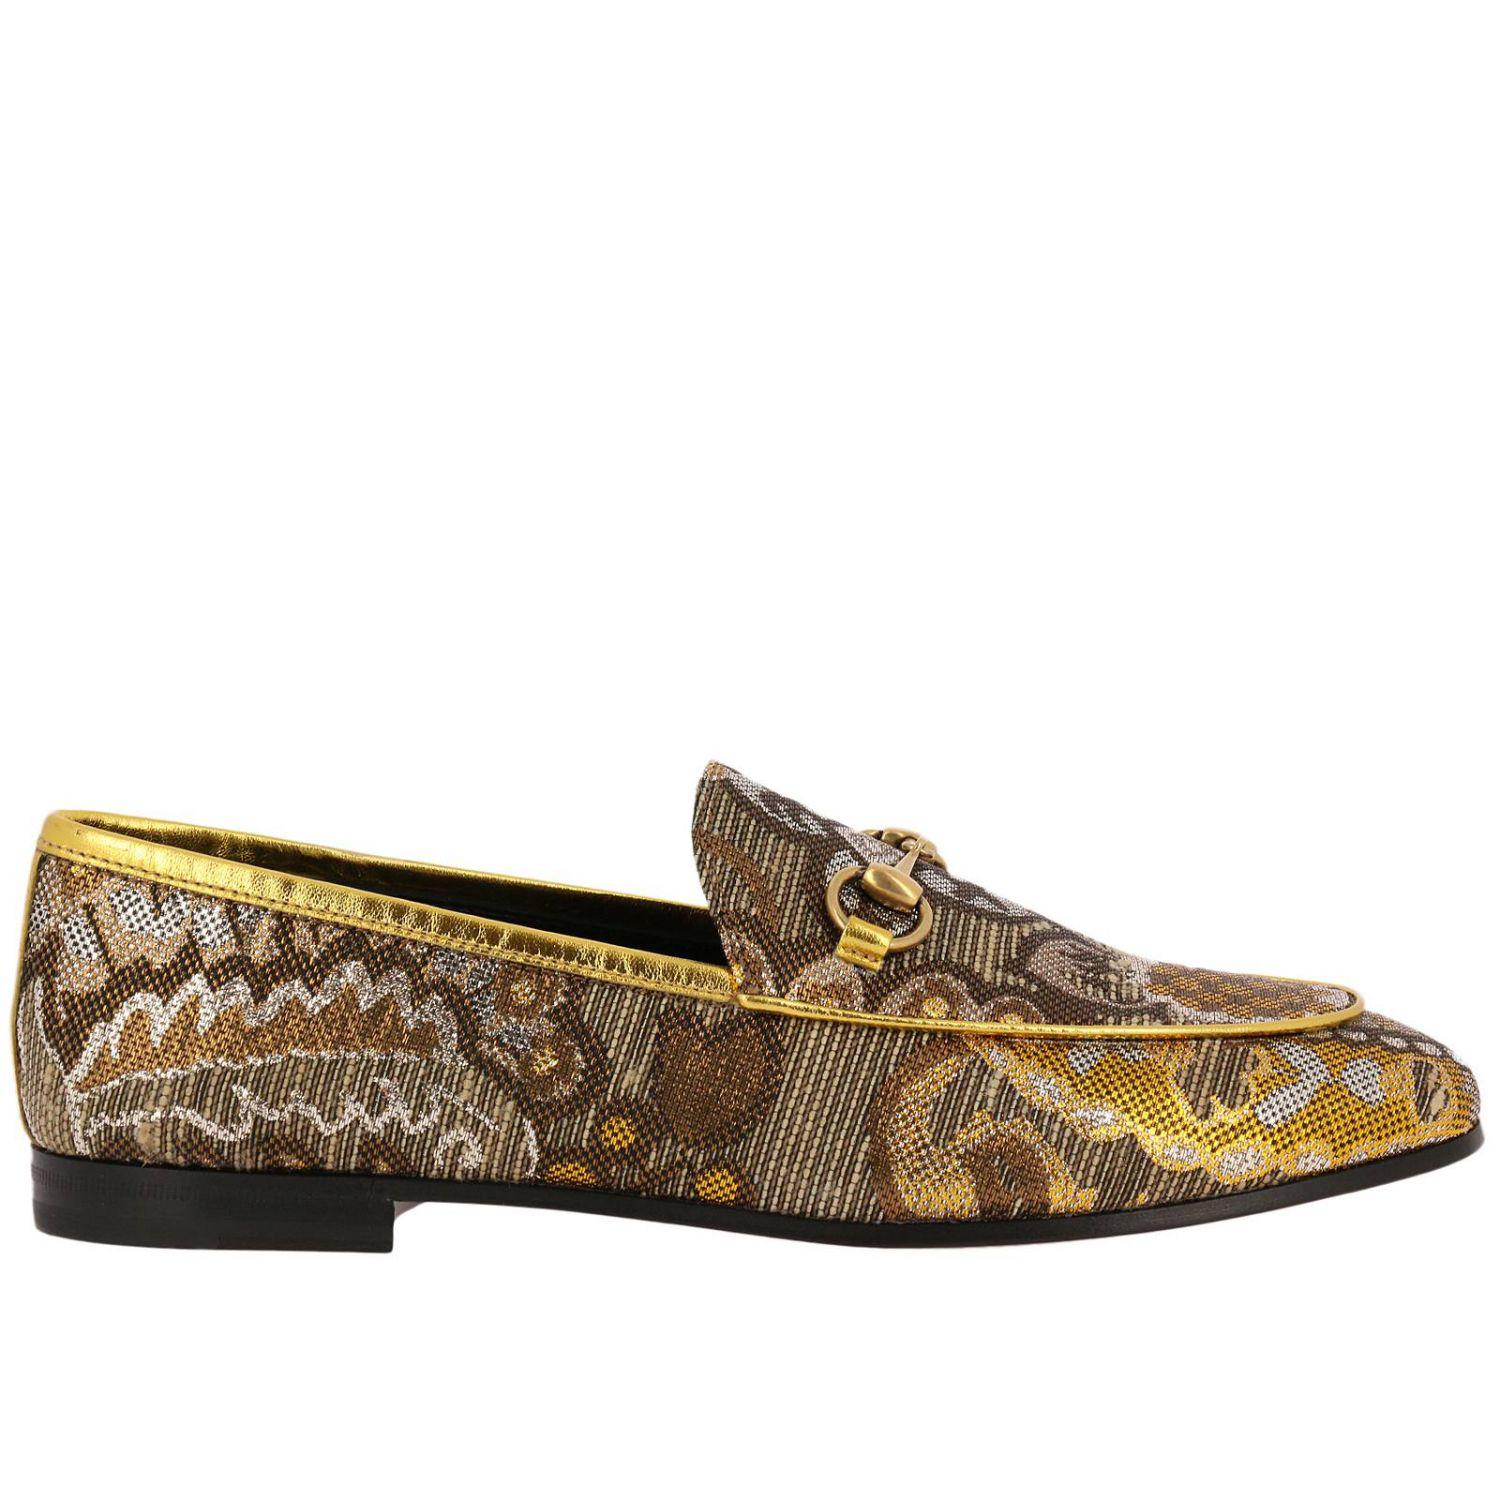 Lyst - Gucci Loafers Shoes Women in Metallic